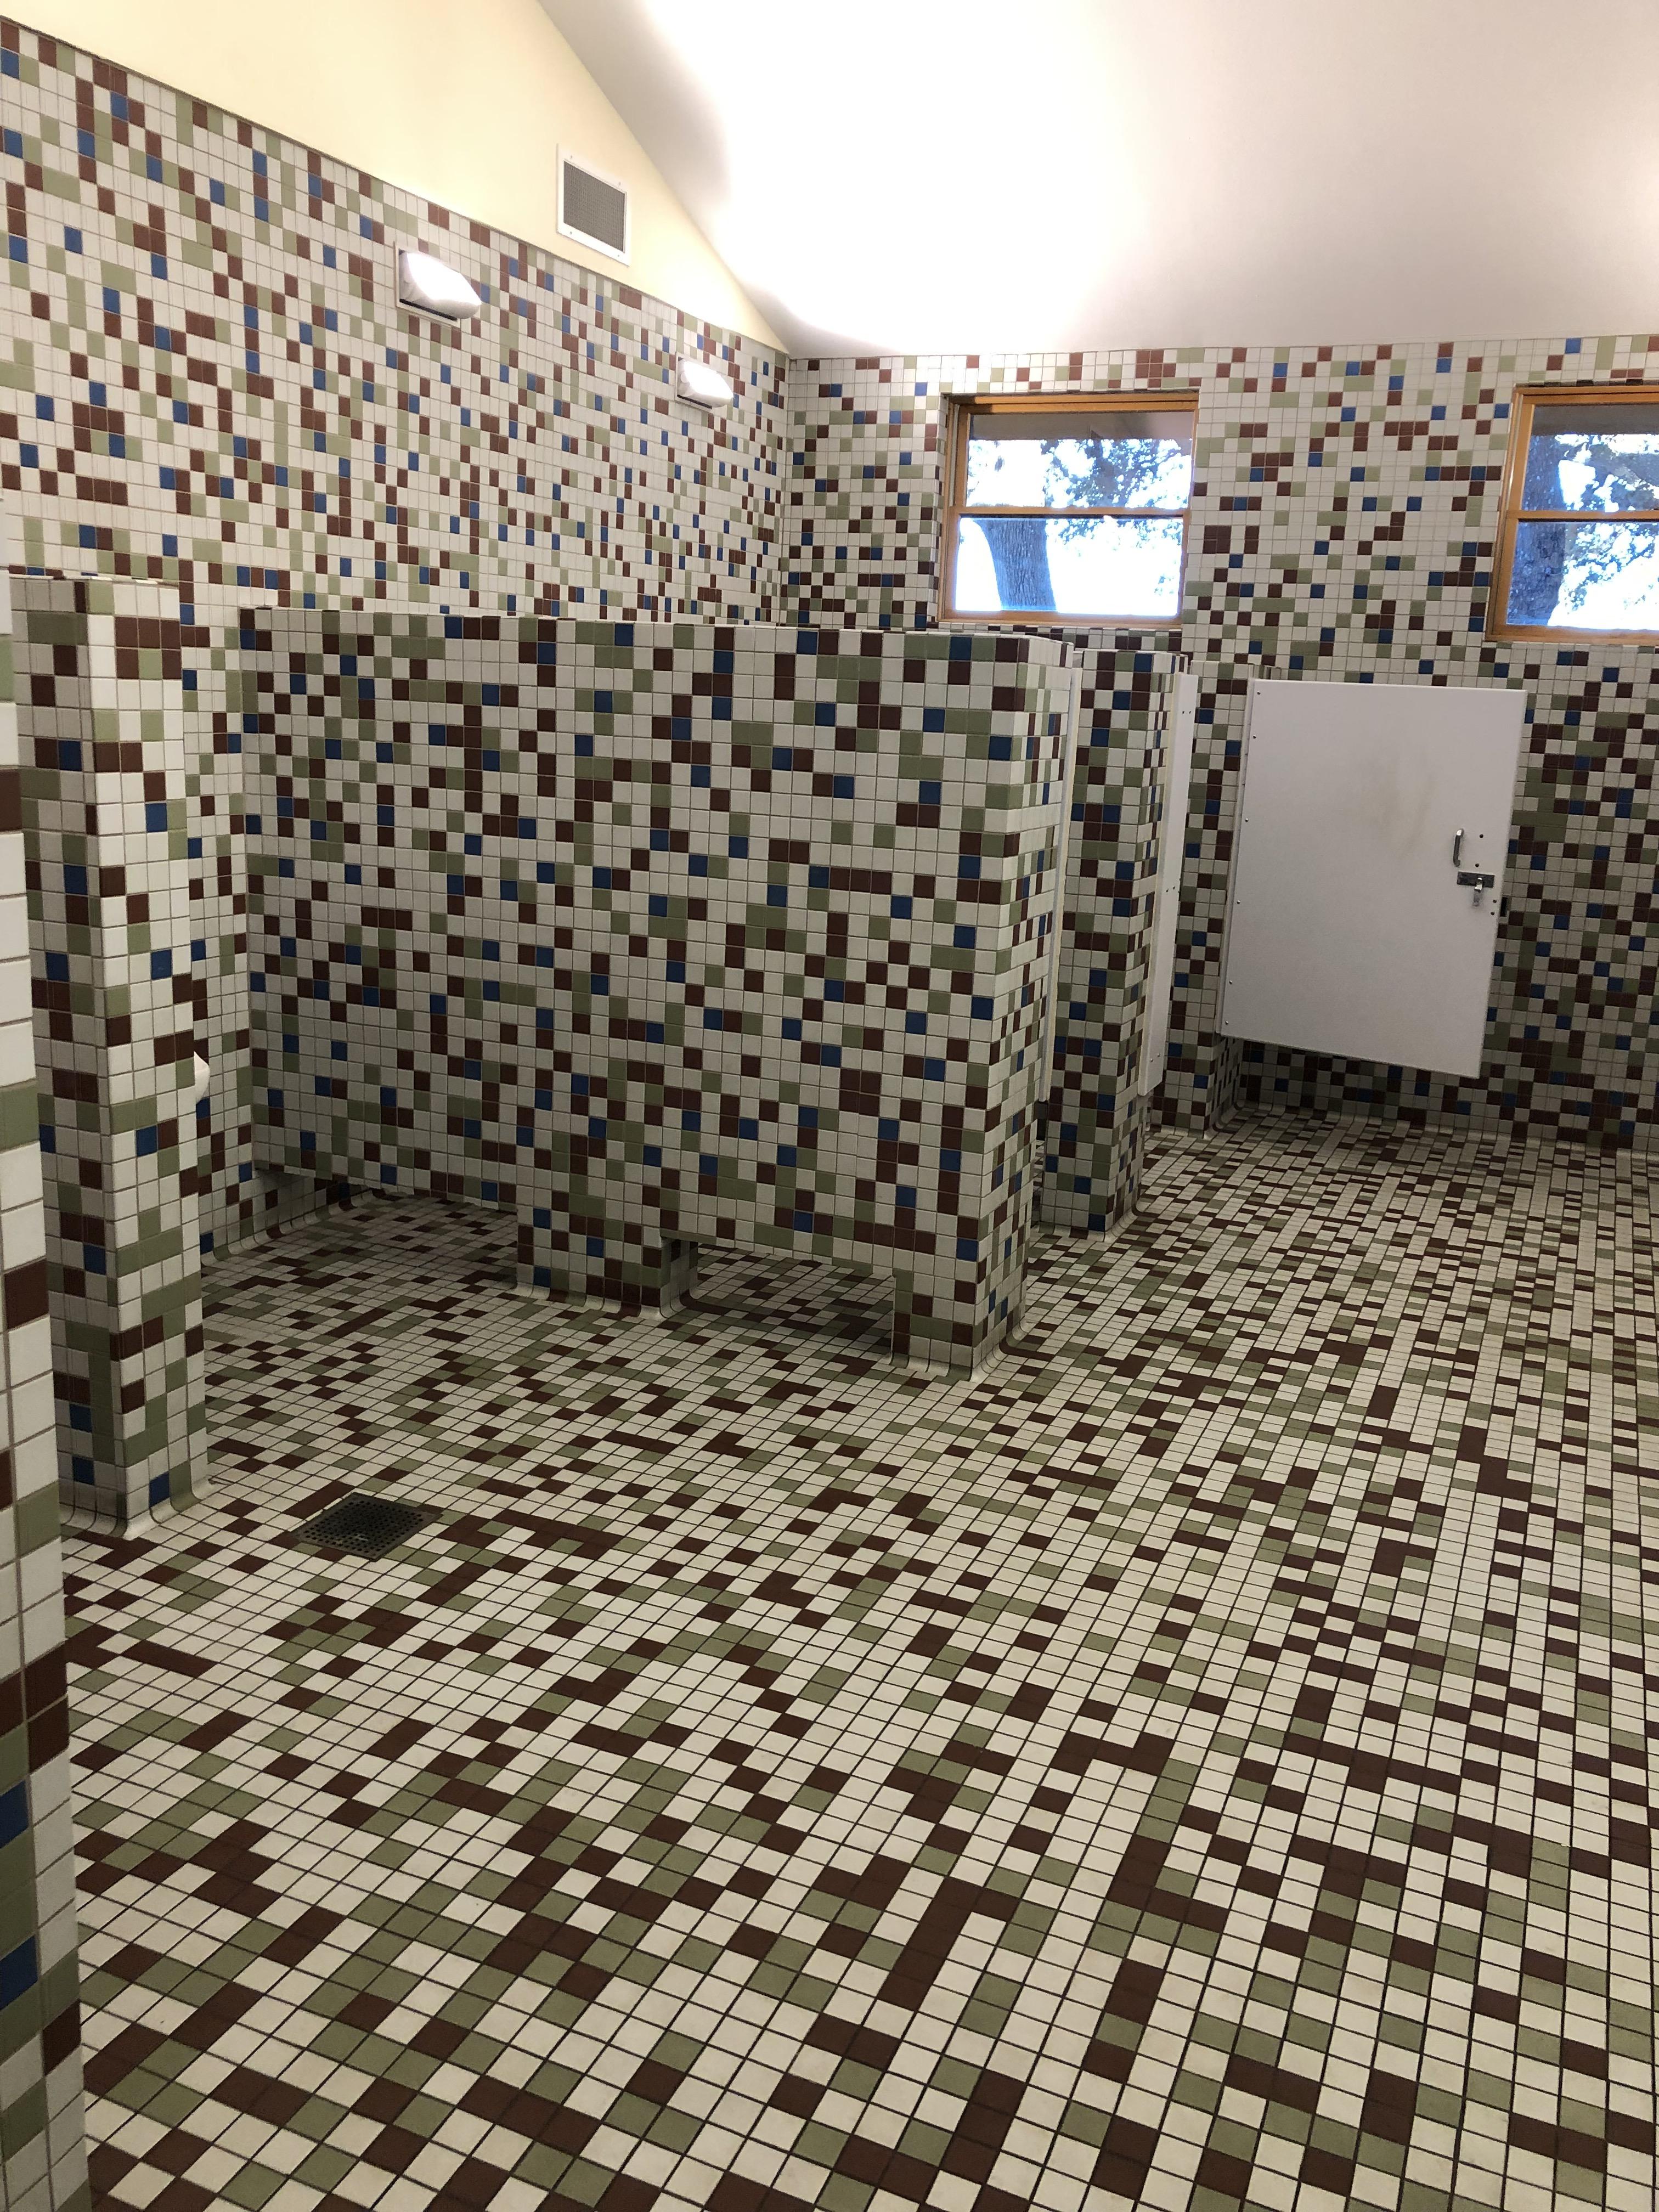 https://www.yves.brette.biz/public/humour_2/A_bathroom_at_a_rest_stop_in_SW_Texas_made_my_head_spin.jpg